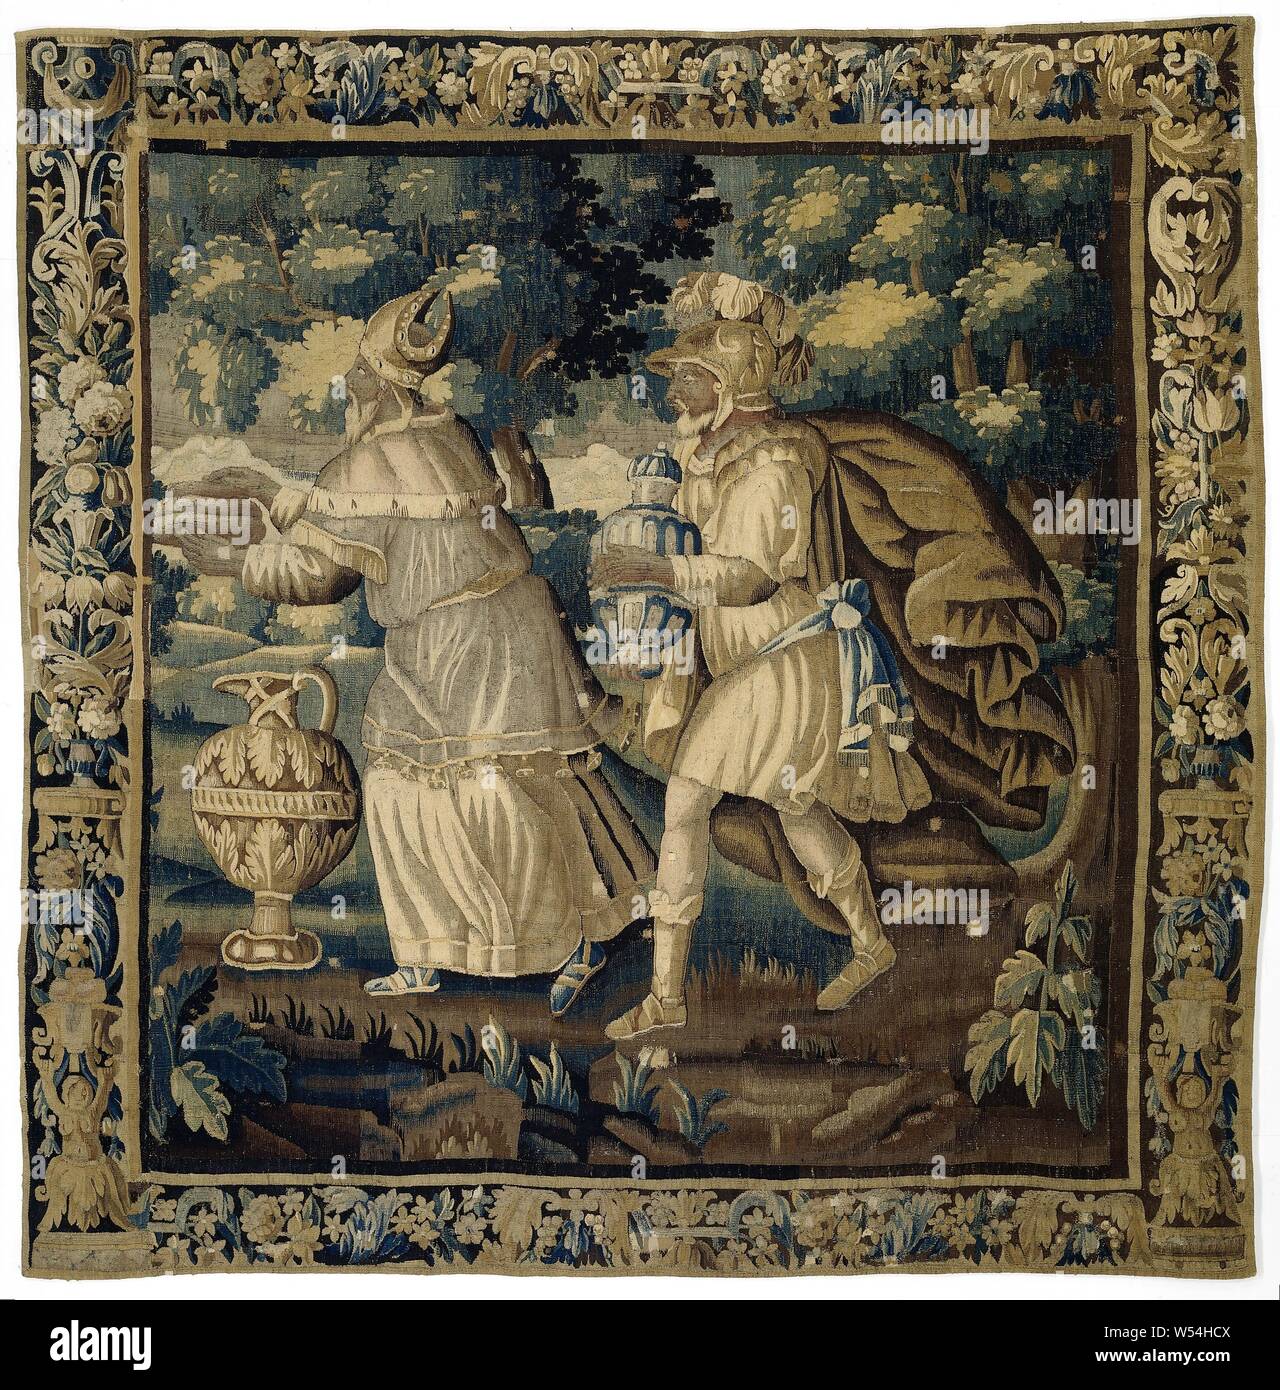 Melchisedek brings bread and wine, Tapestry with fragment of a performance of Melchisedek offering showbread and wine to Abraham., Monogrammist HD (wever) (workshop of), Aubusson, c. 1660 - c. 1690, ketting, inslag, tapestry, h 276.0 cm × w 272.0 cm Stock Photo